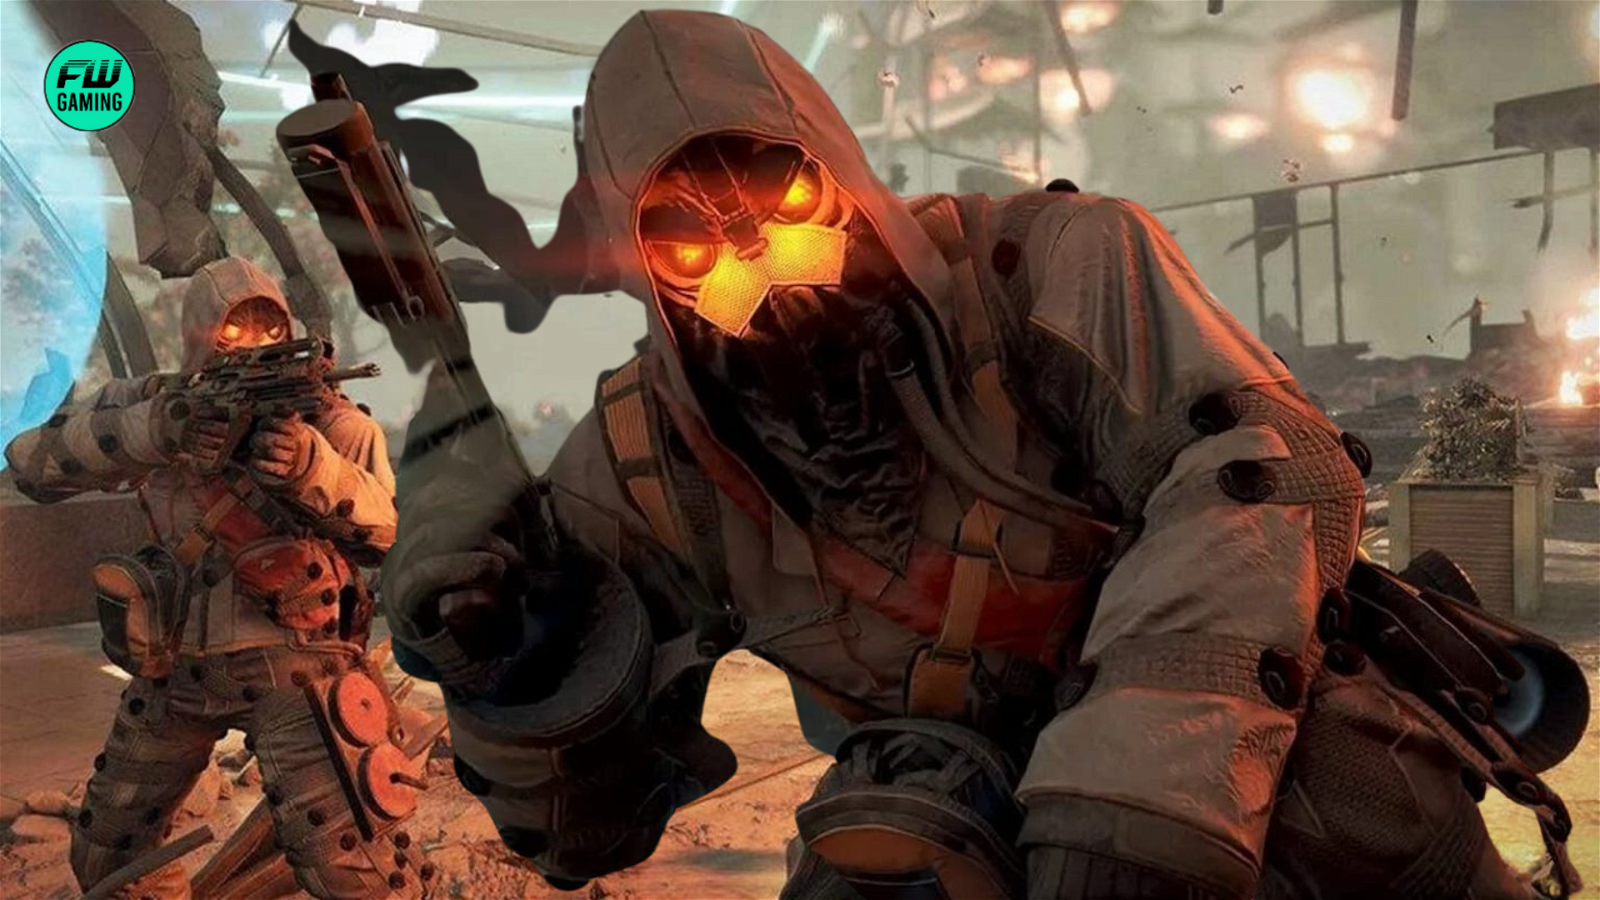 Bad News for Killzone Fans: Although 2025 and Beyond Will See More PlayStation Remakes Being Announced, That Doesn't Include Fighting the HelghastBad News for Killzone Fans: Although 2025 and Beyond Will See More PlayStation Remakes Being Announced, That Doesn't Include Fighting the Helghast